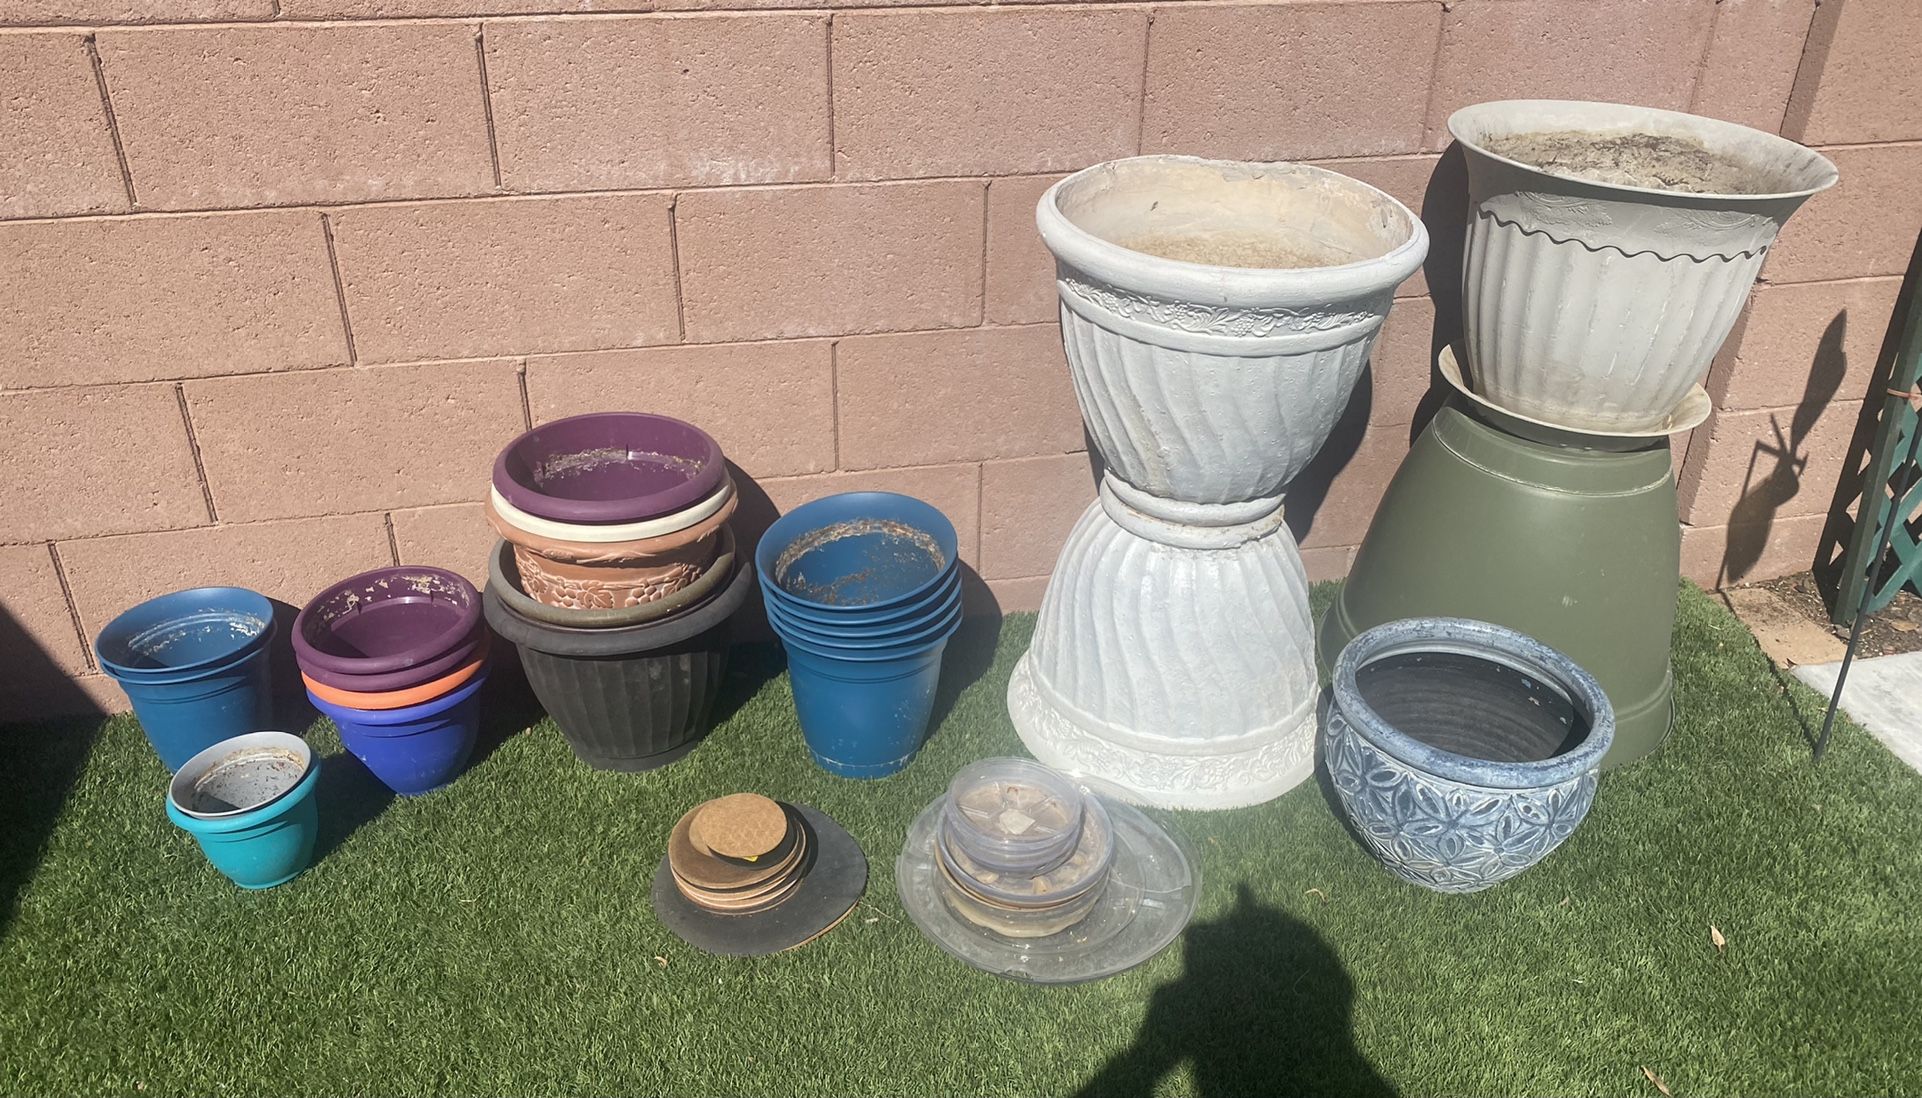 Flower pots and accessories 